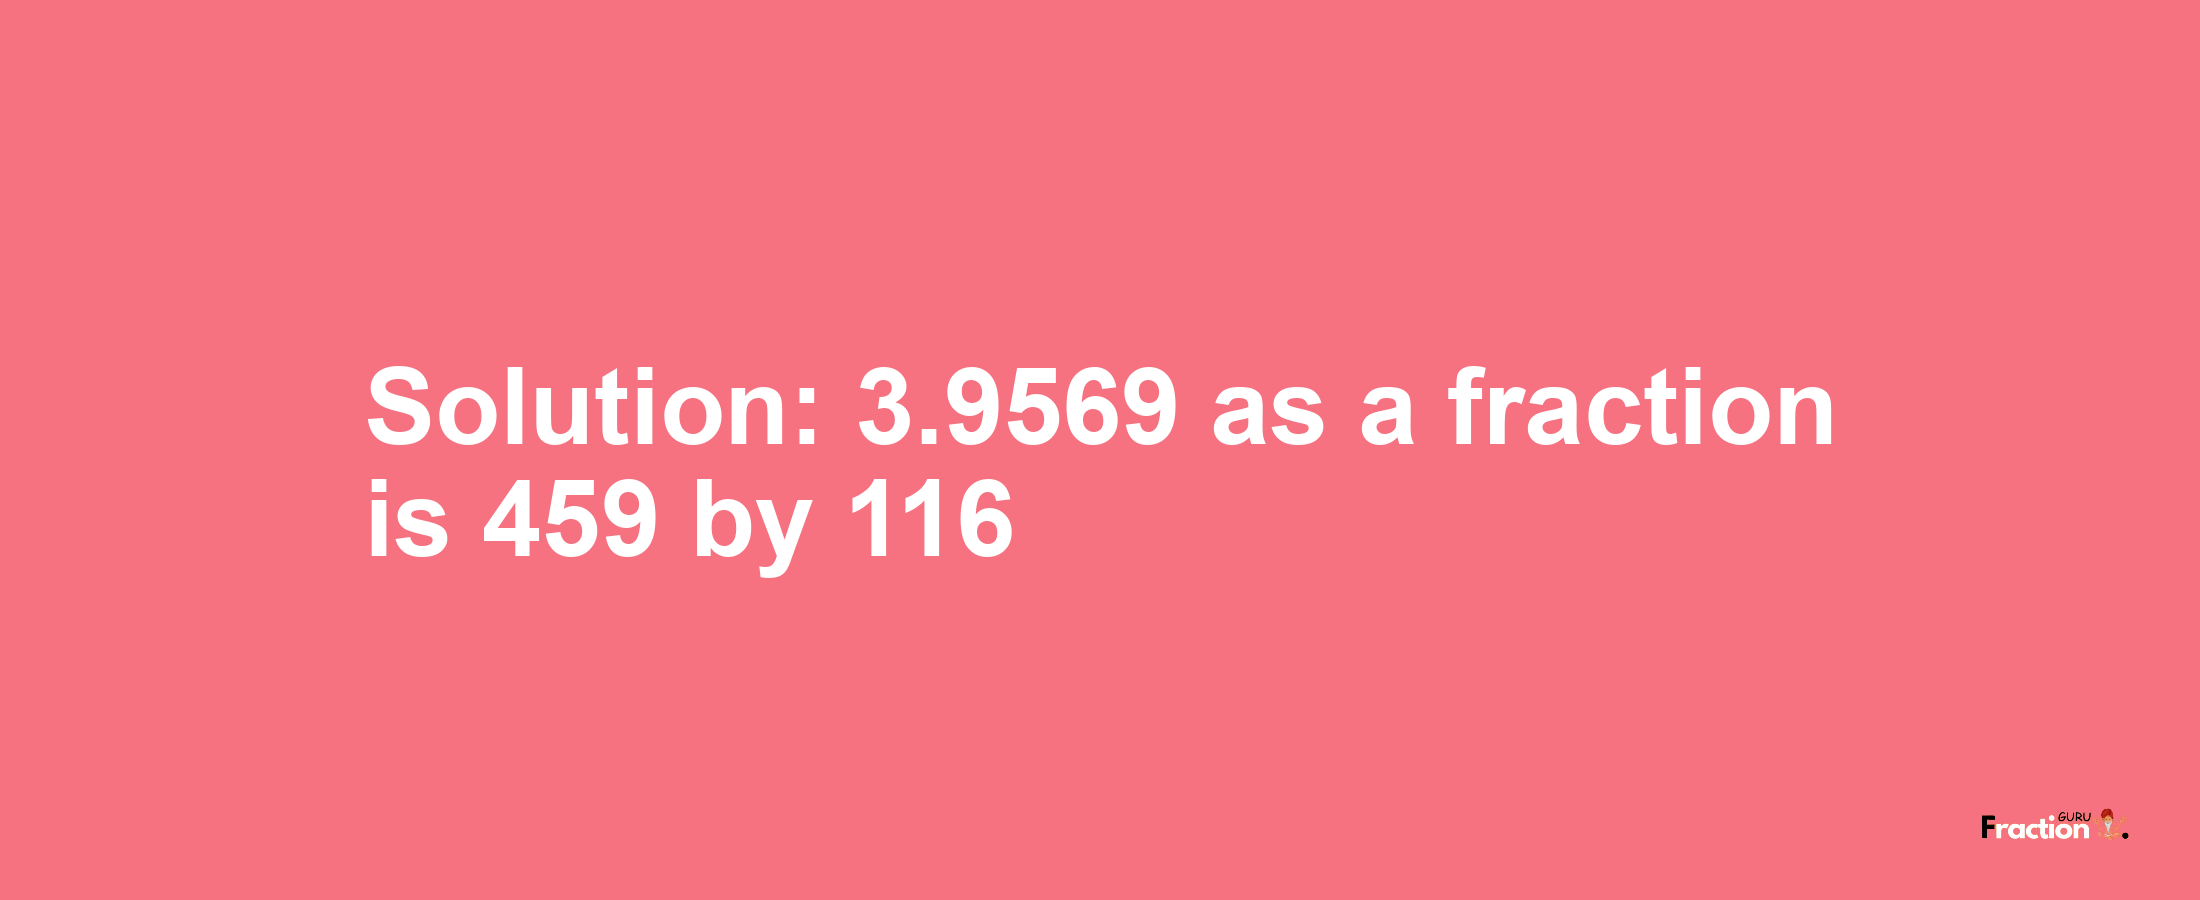 Solution:3.9569 as a fraction is 459/116